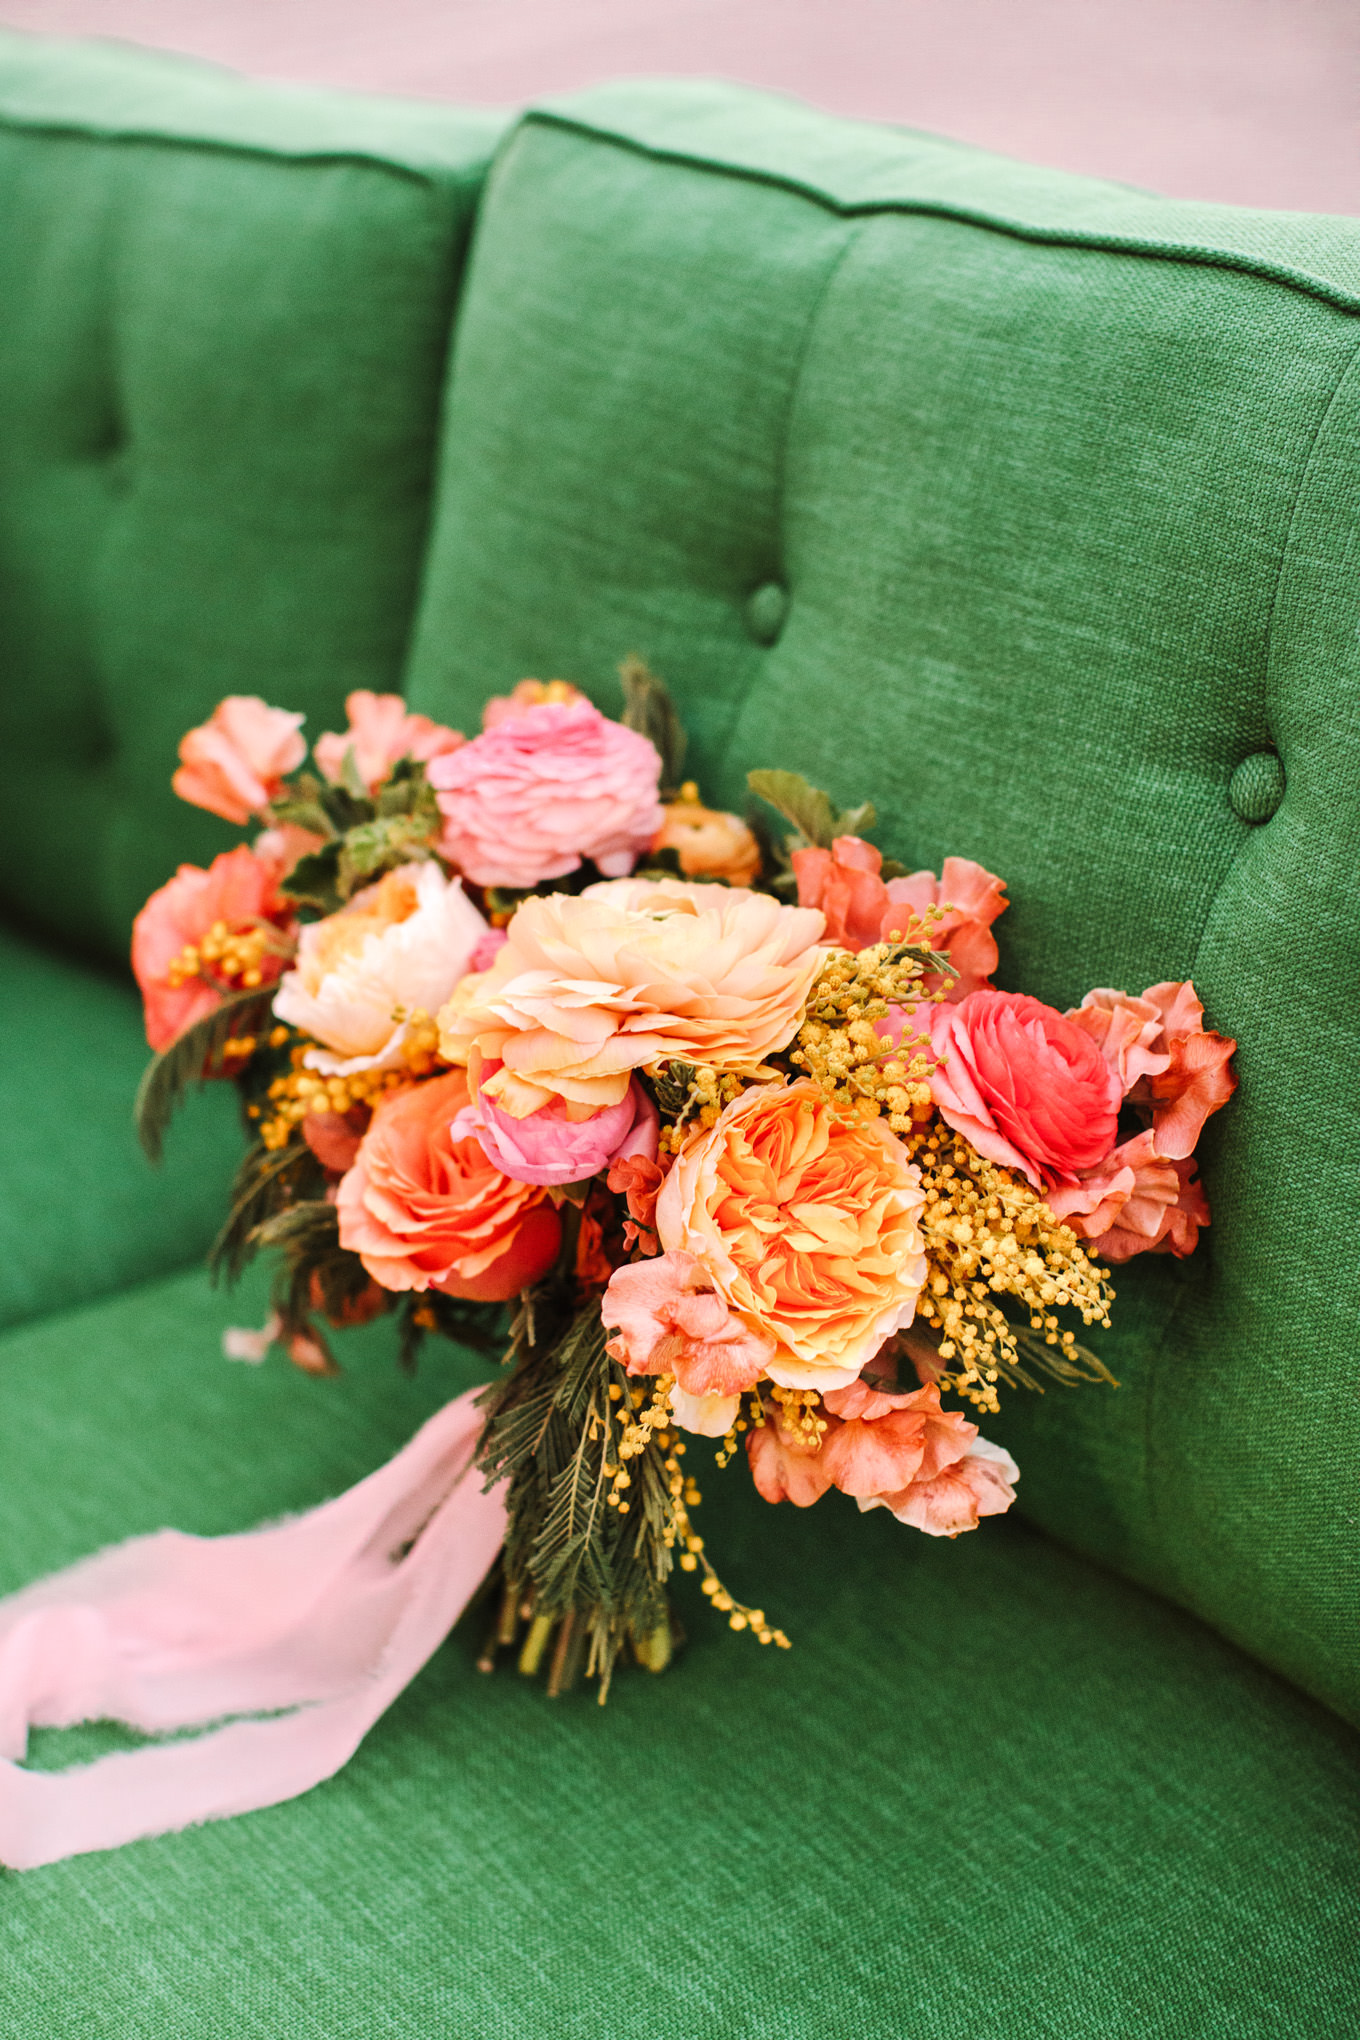 Colorful bouquet on green couch | Colorful wedding at The Unique Space Los Angeles published in The Knot Magazine | Fresh and colorful photography for fun-loving couples in Southern California | #colorfulwedding #losangeleswedding #weddingphotography #uniquespace Source: Mary Costa Photography | Los Angeles